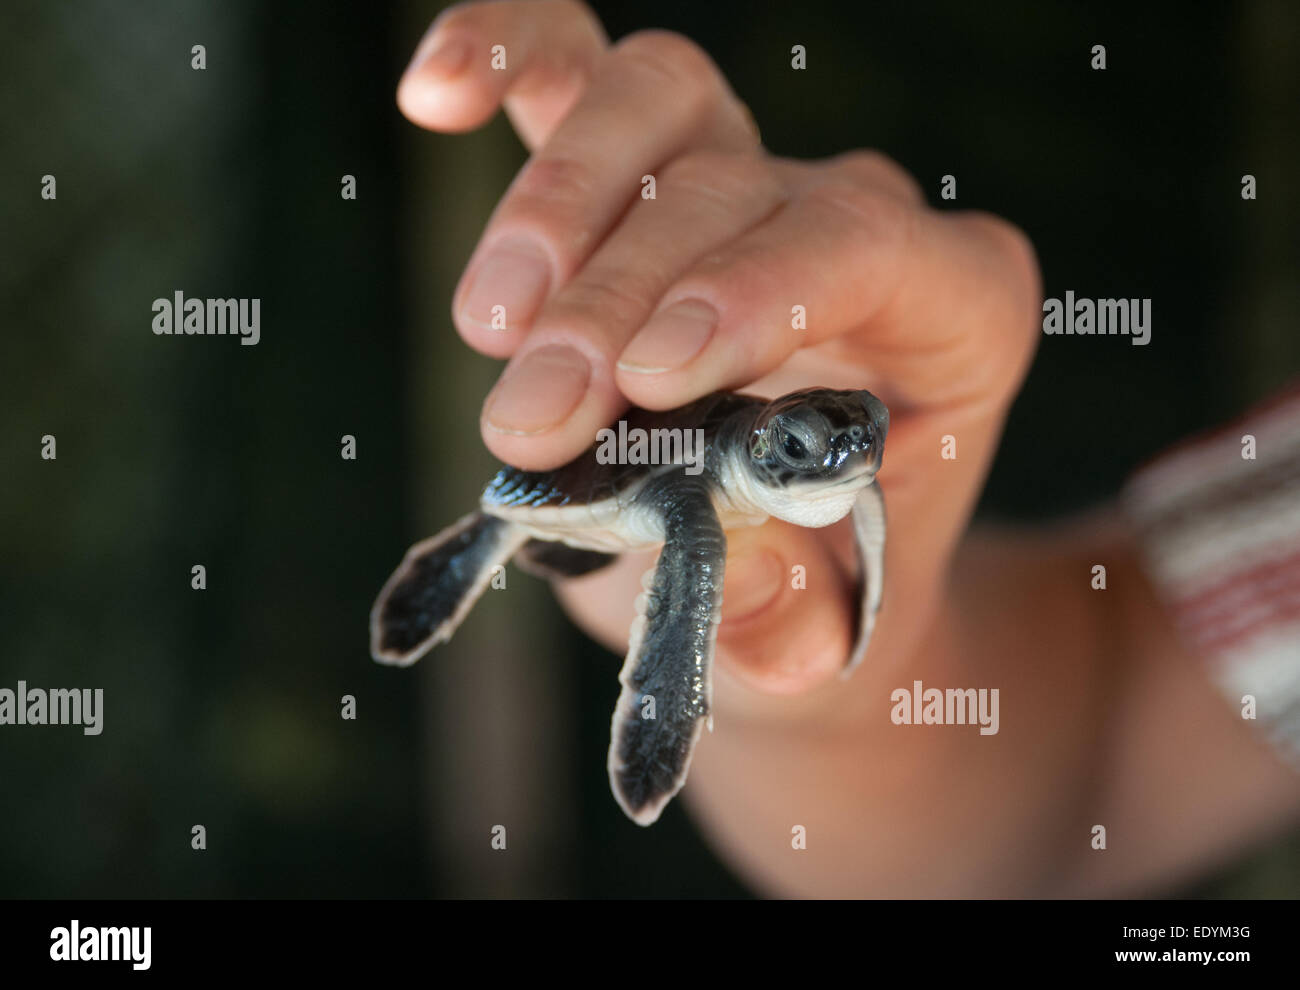 Woman hold a turtlet in her hand. The turtlet is two days old. Stock Photo